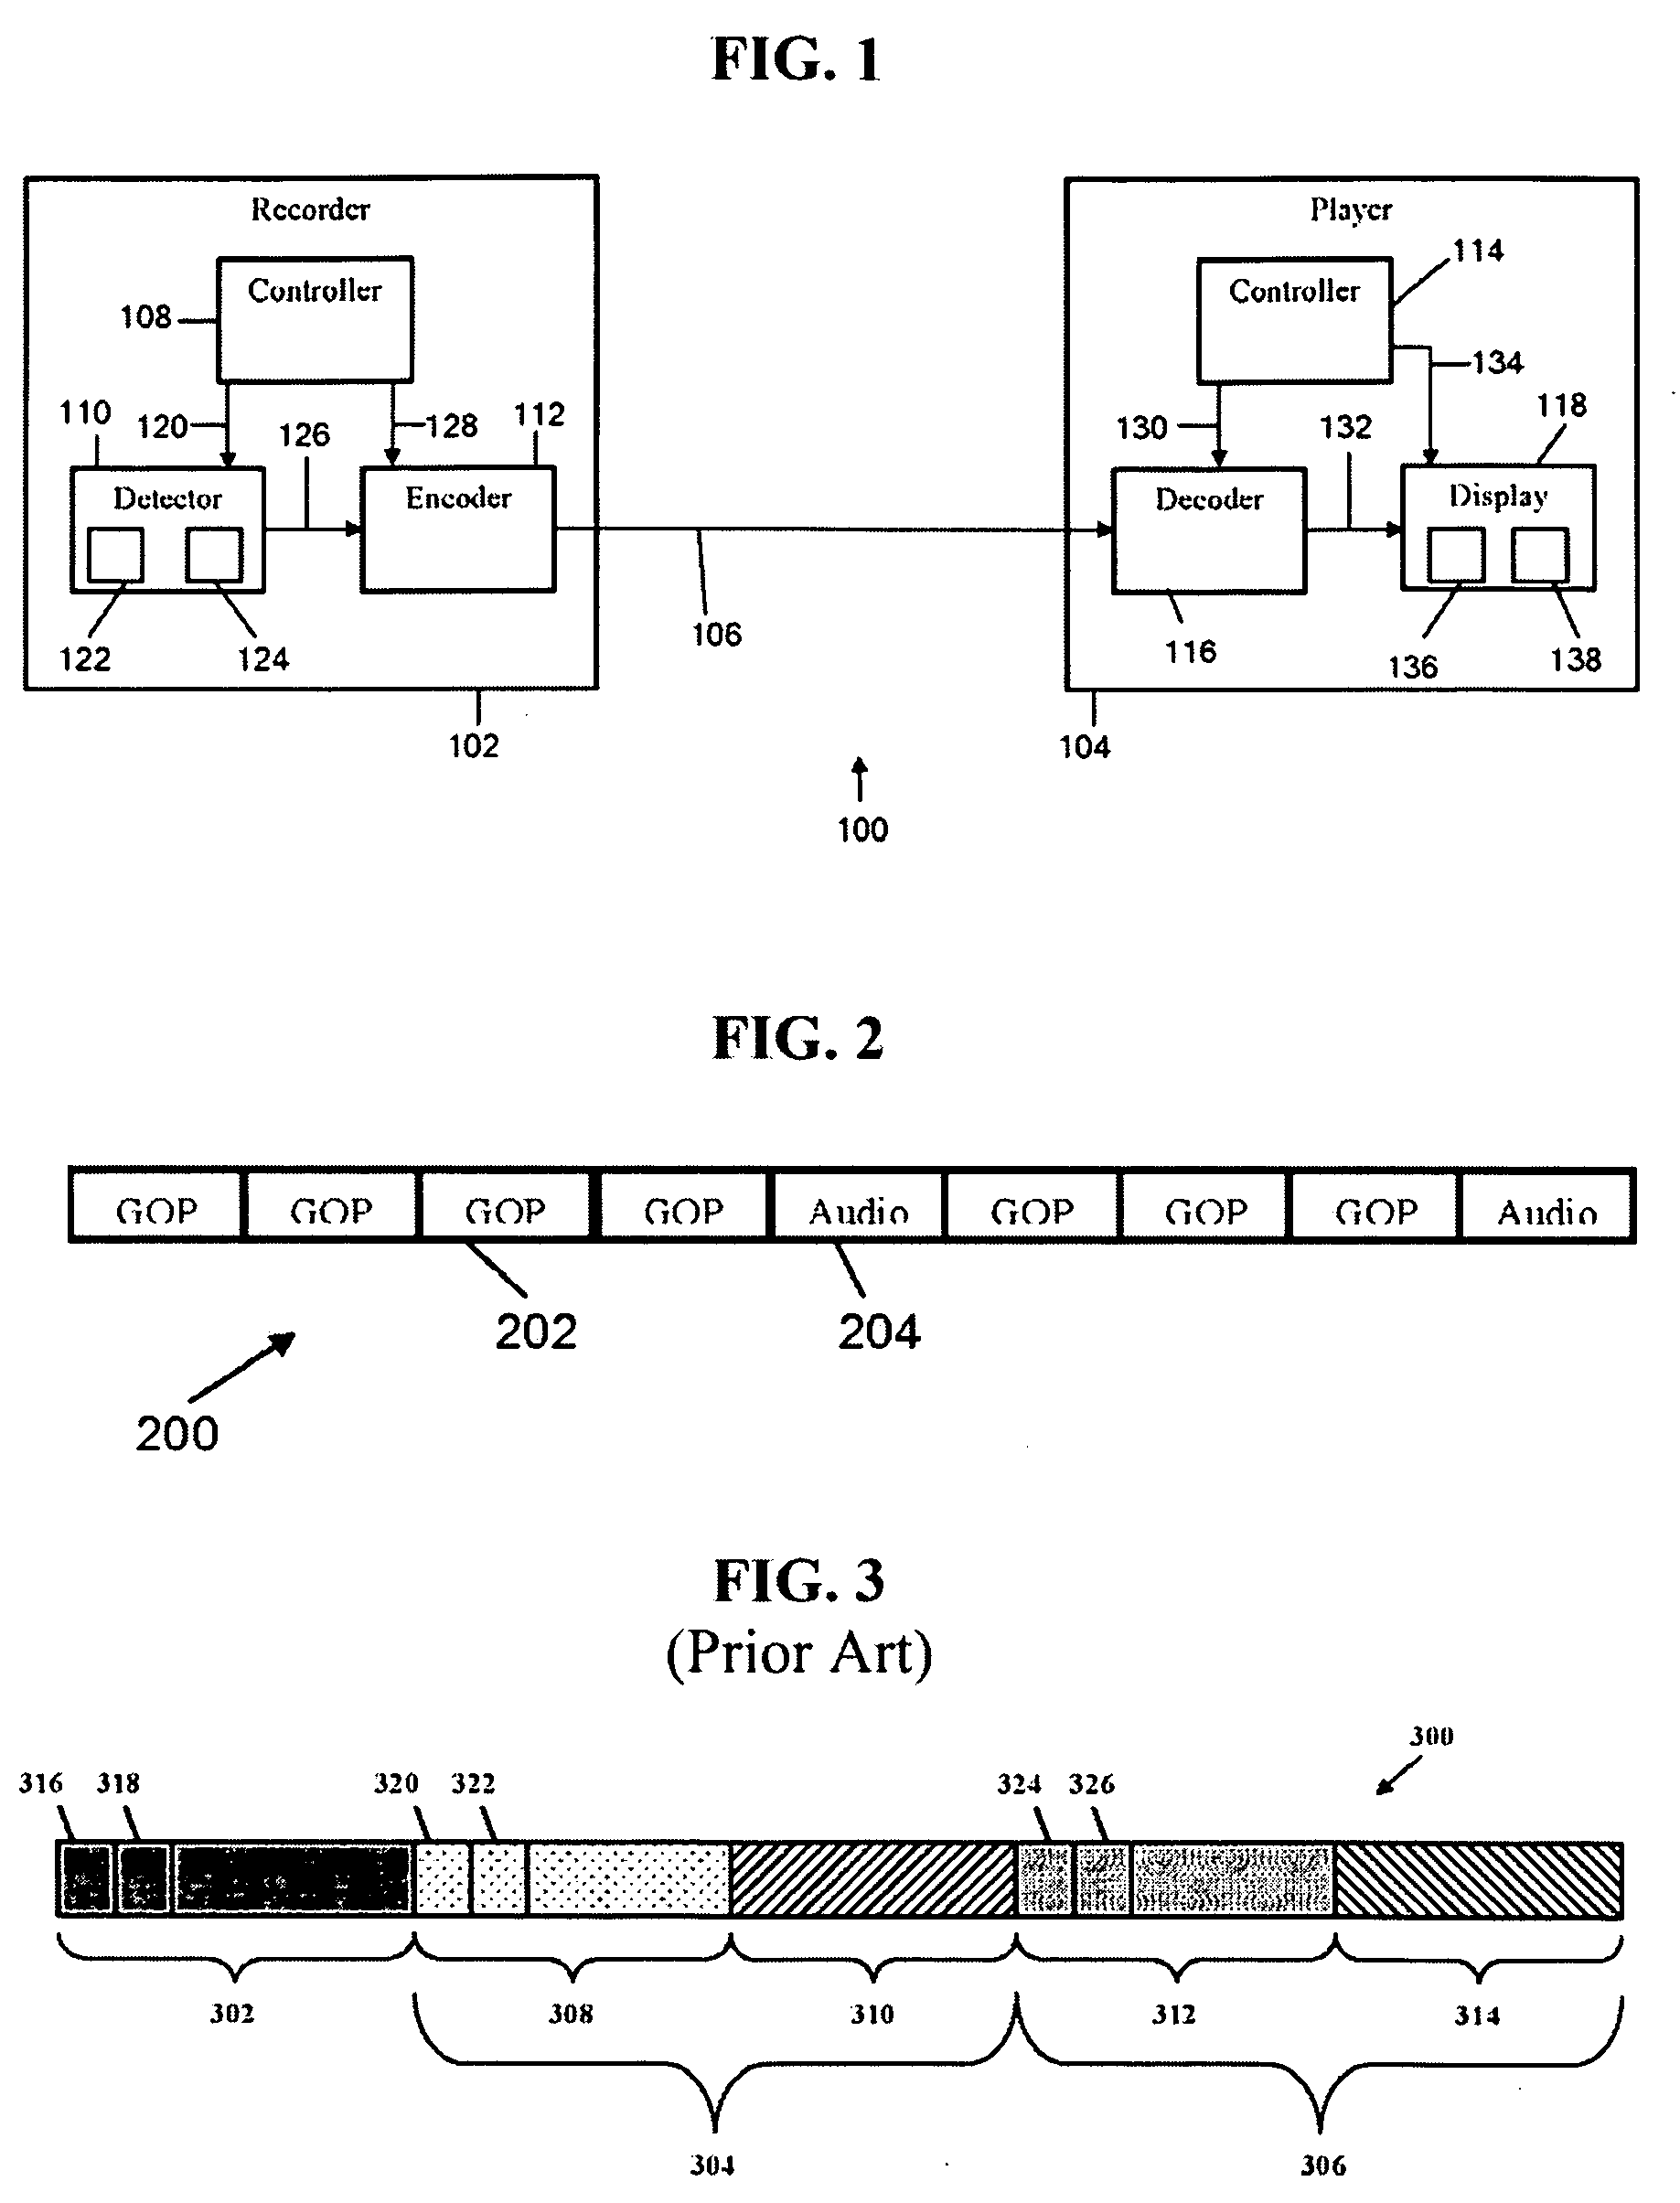 System and method for recording high frame rate video, replaying slow-motion and replaying normal speed with audio-video synchronization